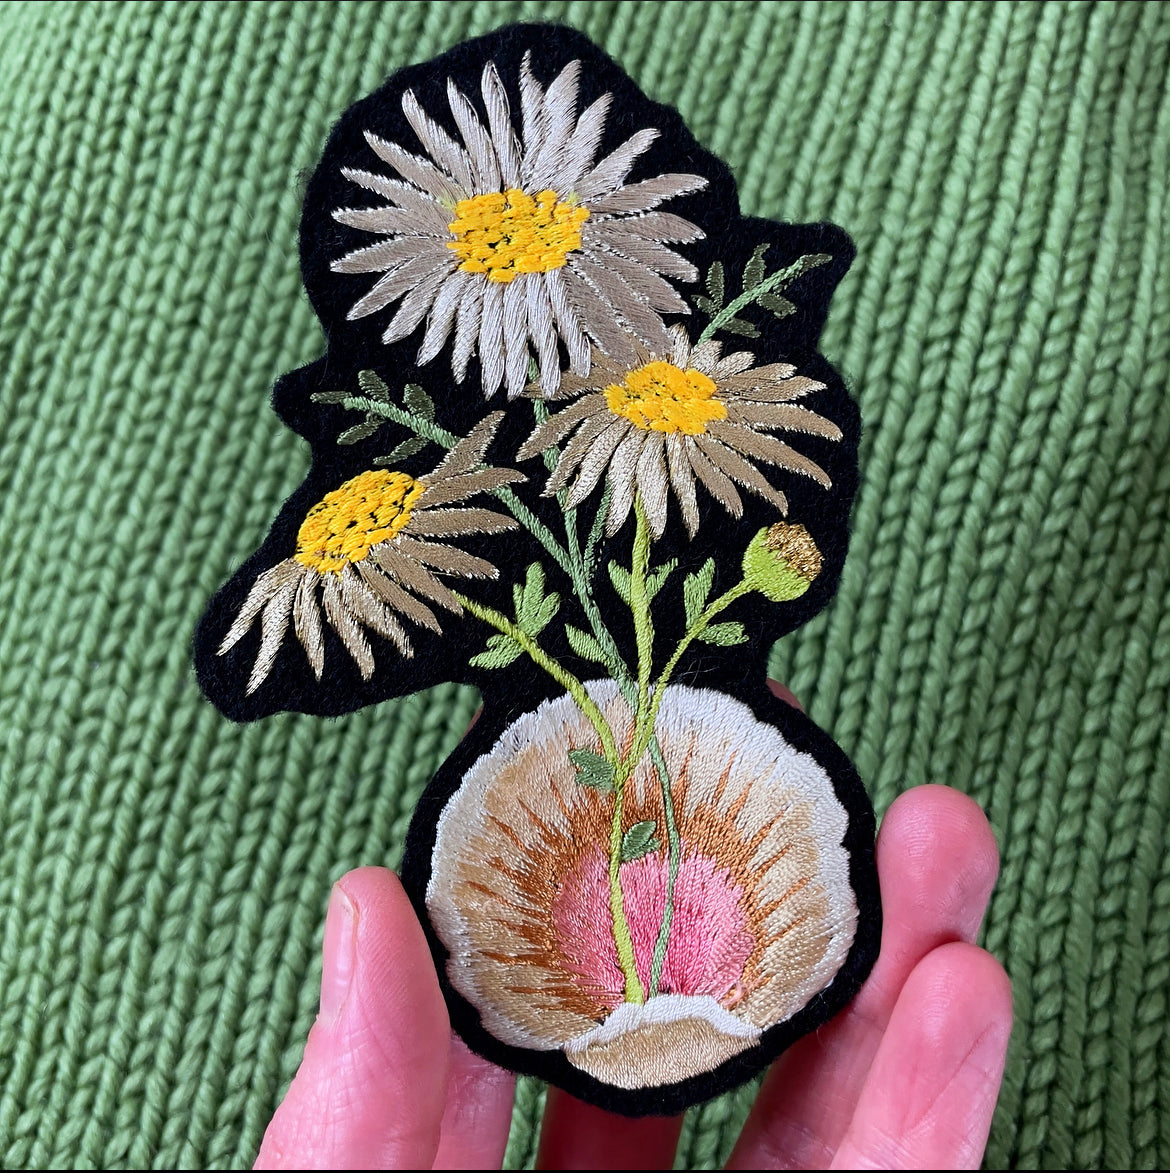 Metallic Daisy & Shell Embroidered Patch held in a hand over a green background